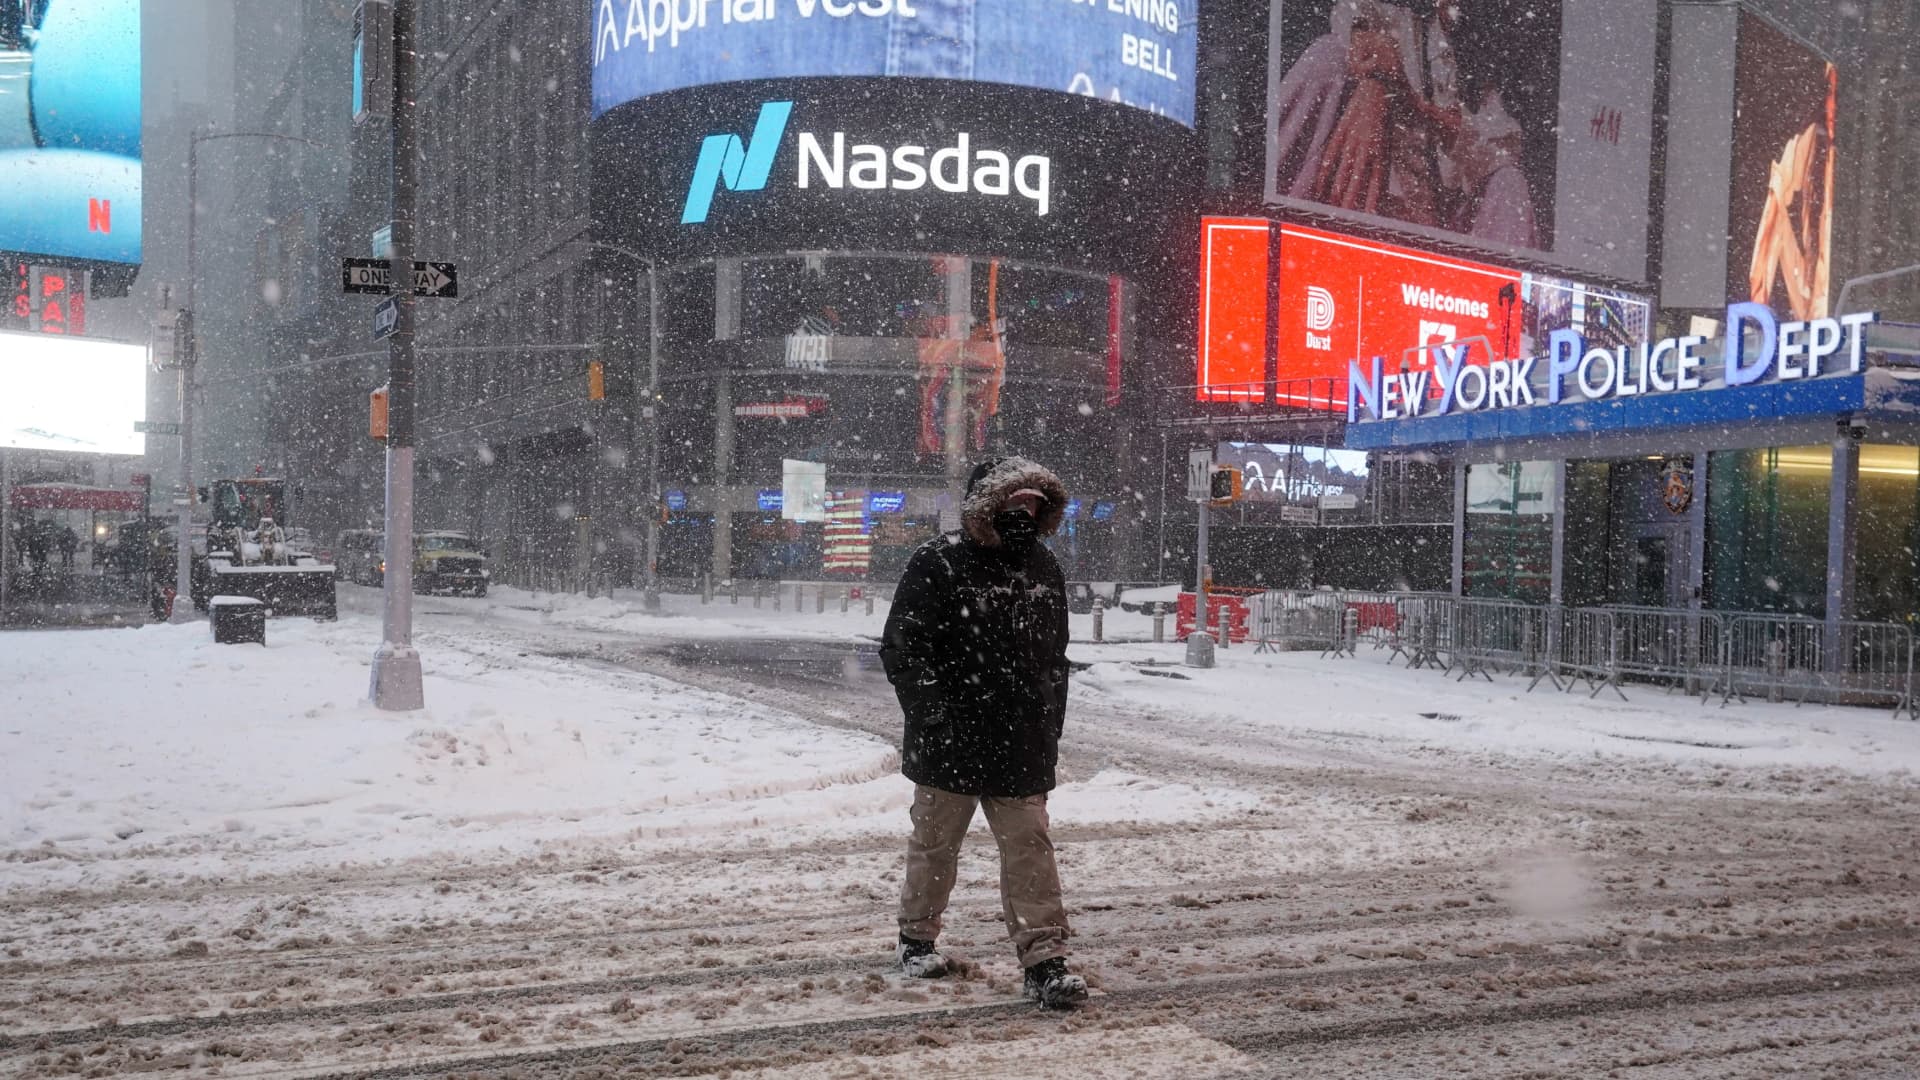 A person crosses a street during a snow storm, amid the coronavirus disease (COVID-19) pandemic, in the Manhattan borough of New York City, New York, U.S., February 1, 2021.